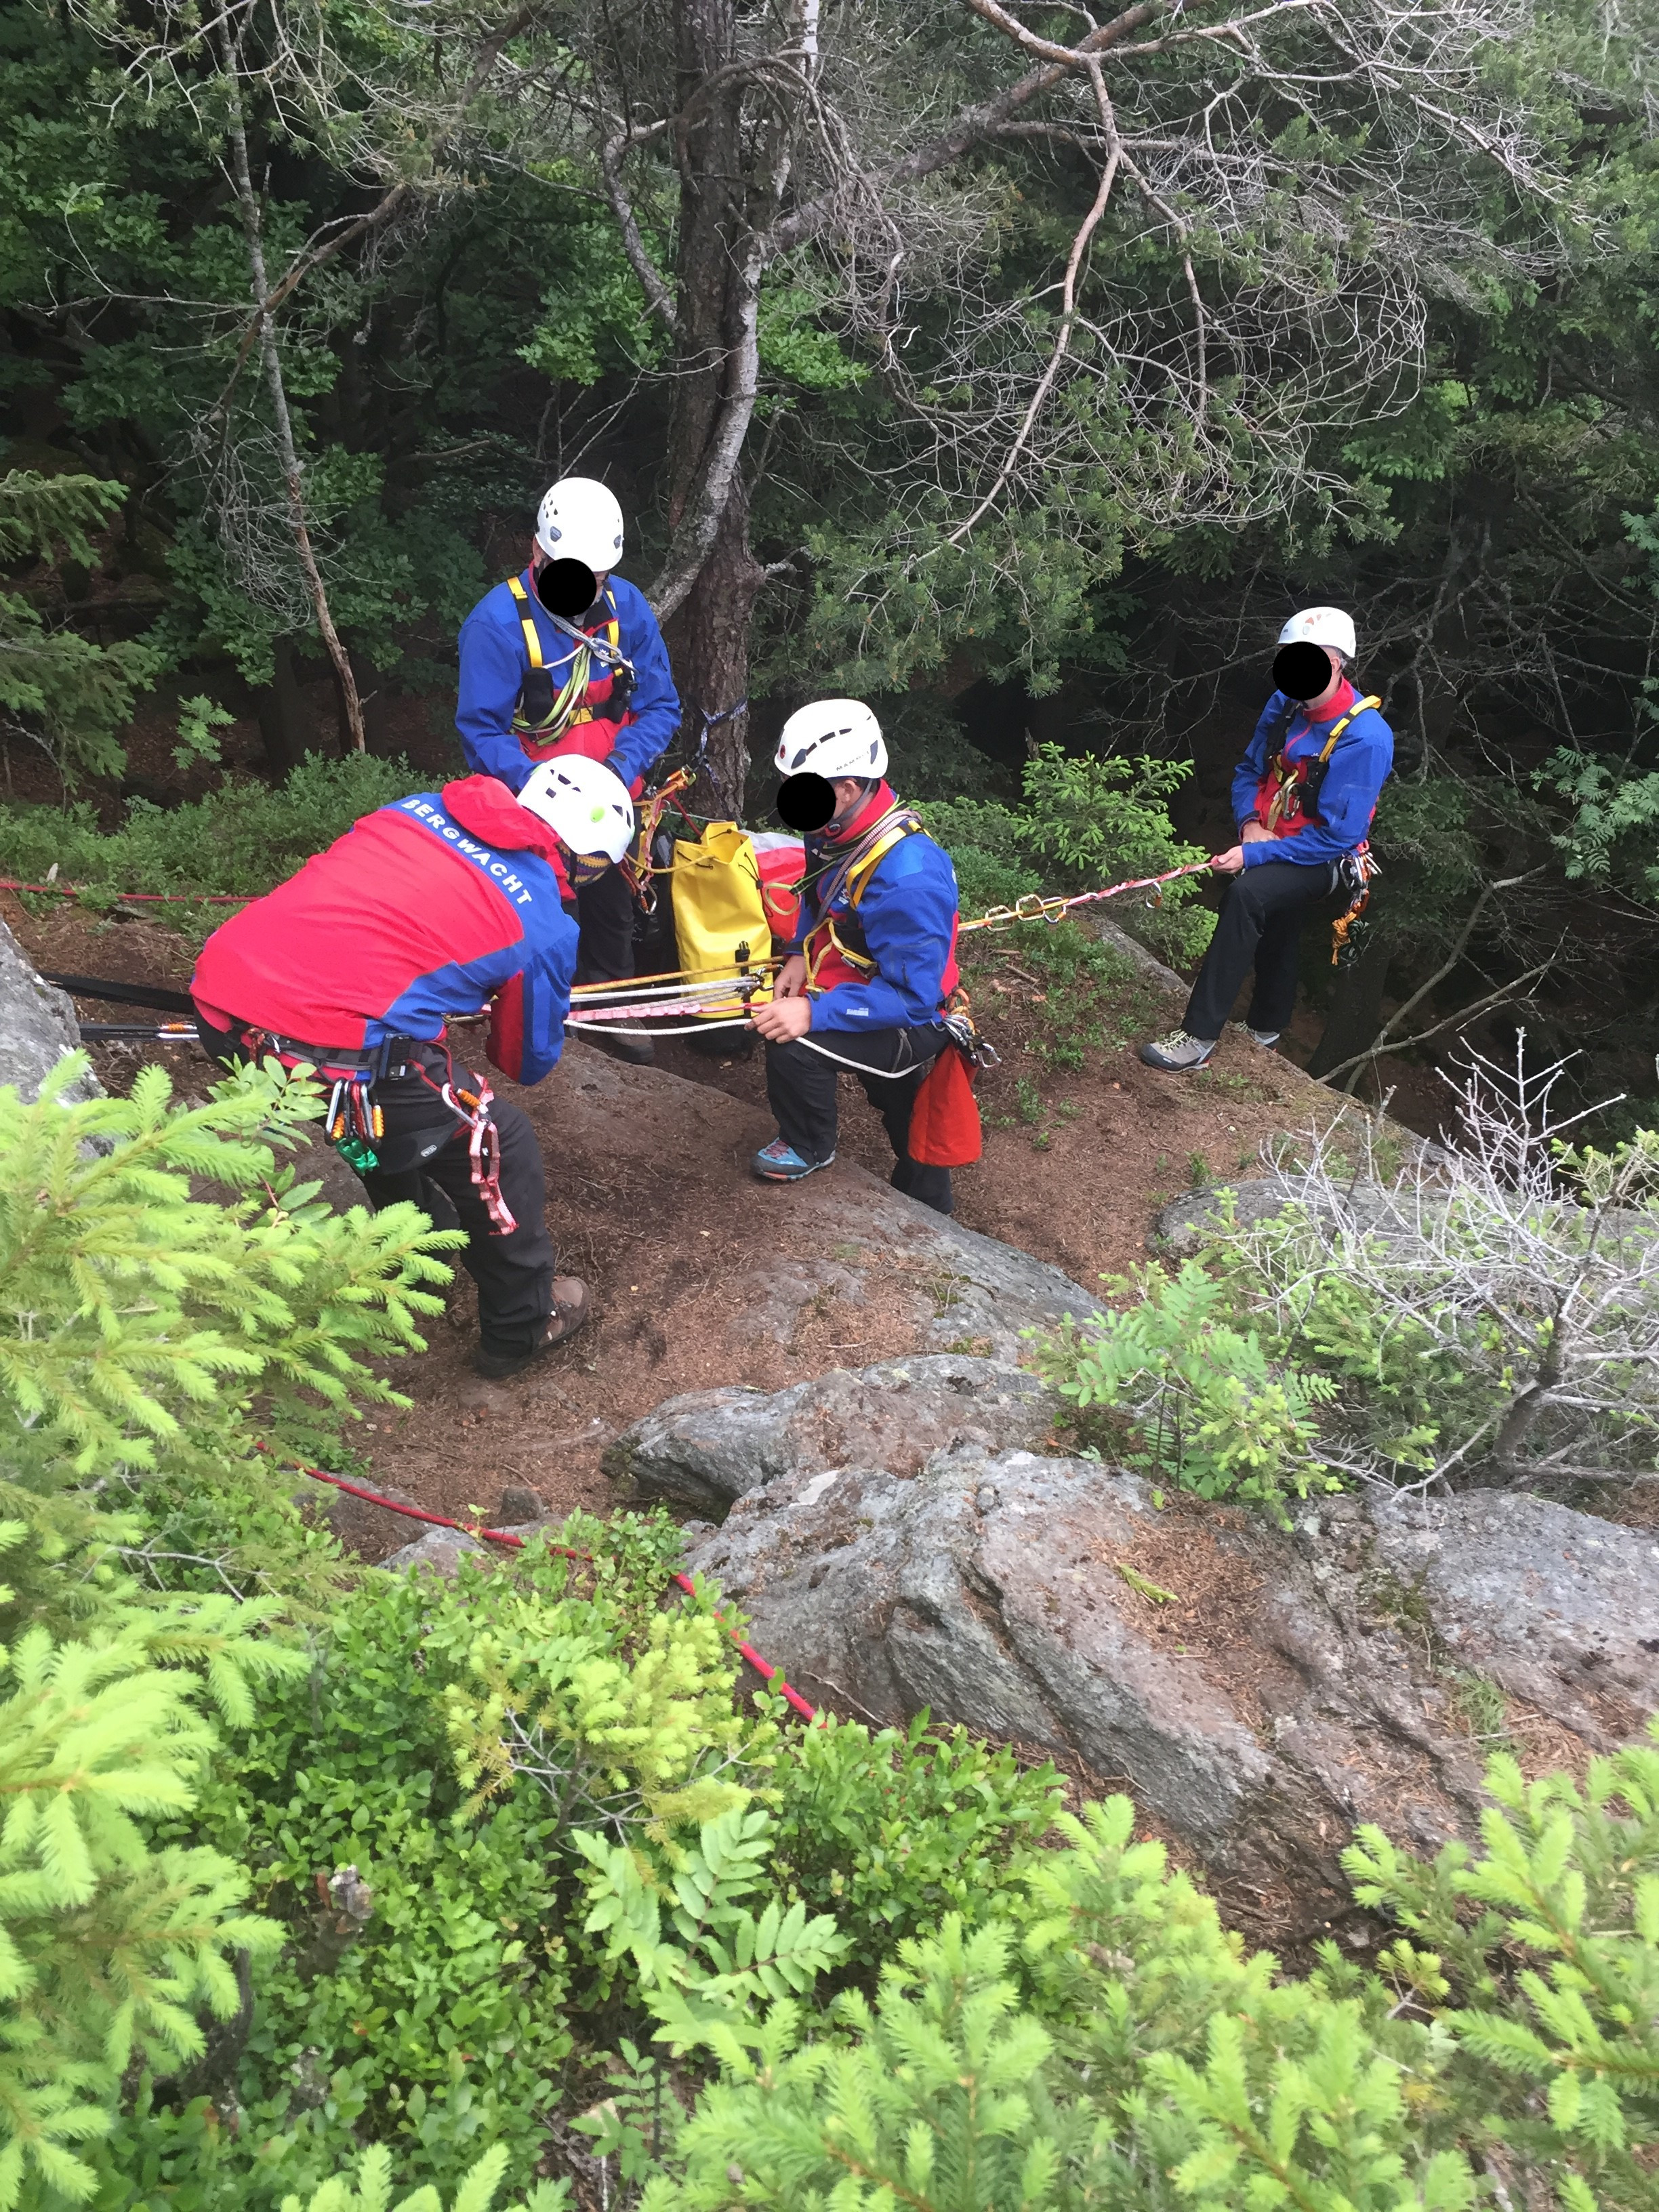 Four people with helmets on a wooded mountain, two of them secured with ropes.